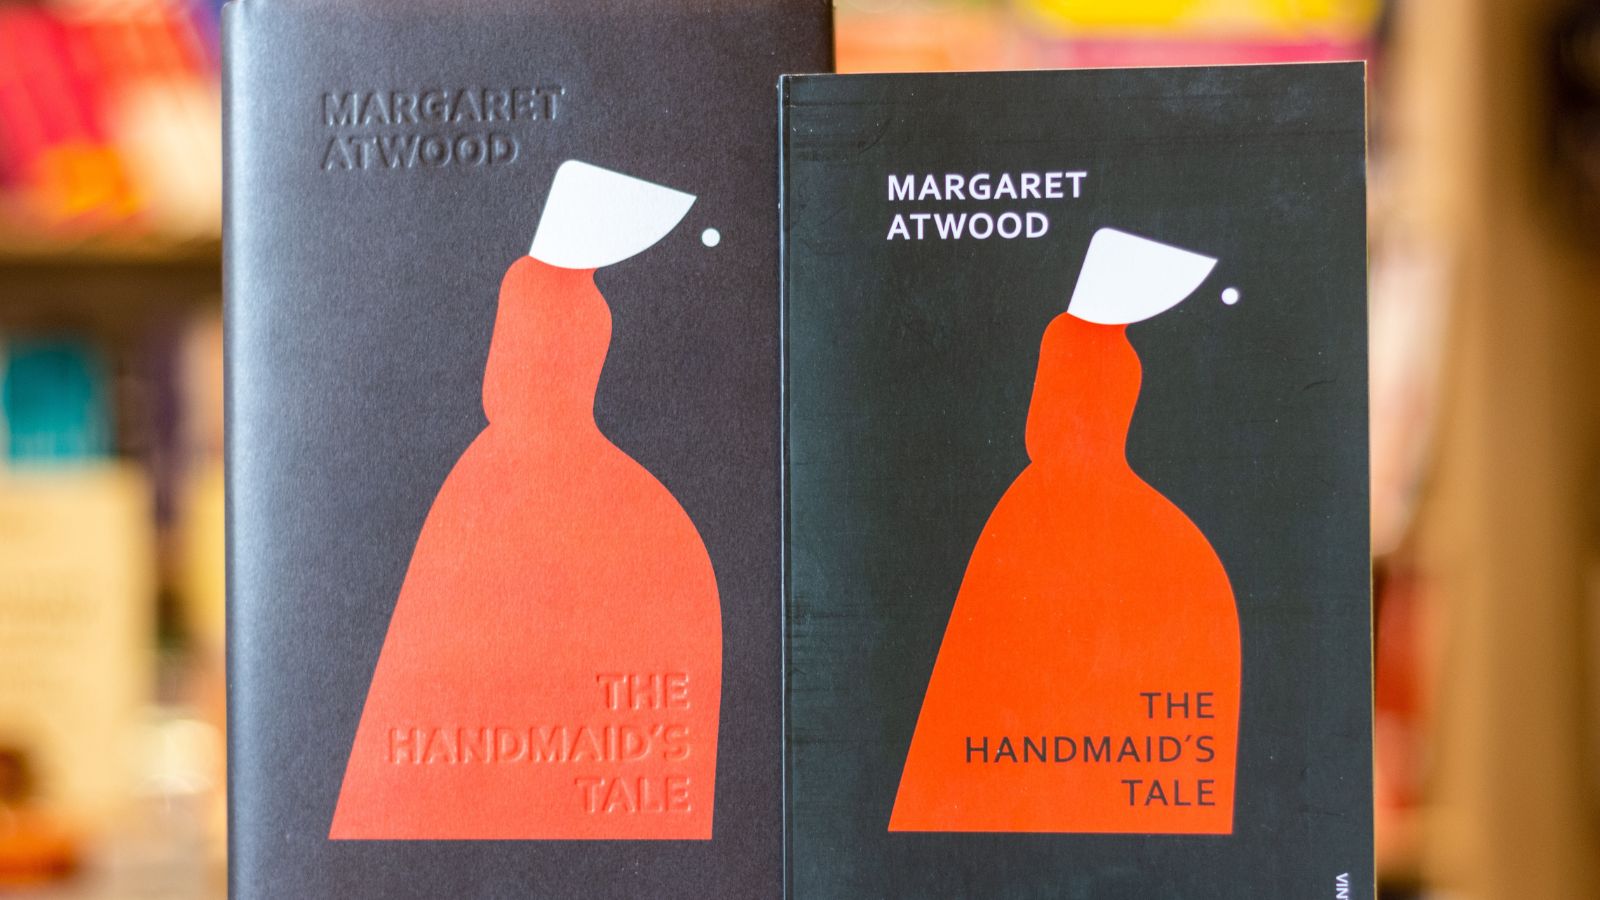 <p>The most terrifying thing about The Handmaid's Tale is that it was inspired by actual events. The novel is set in a fictional version of the United States, where women have been forced into sexual servitude, reproducing against their will to repopulate the state. This book is shocking, disturbing, and all too relevant in the present day.</p>